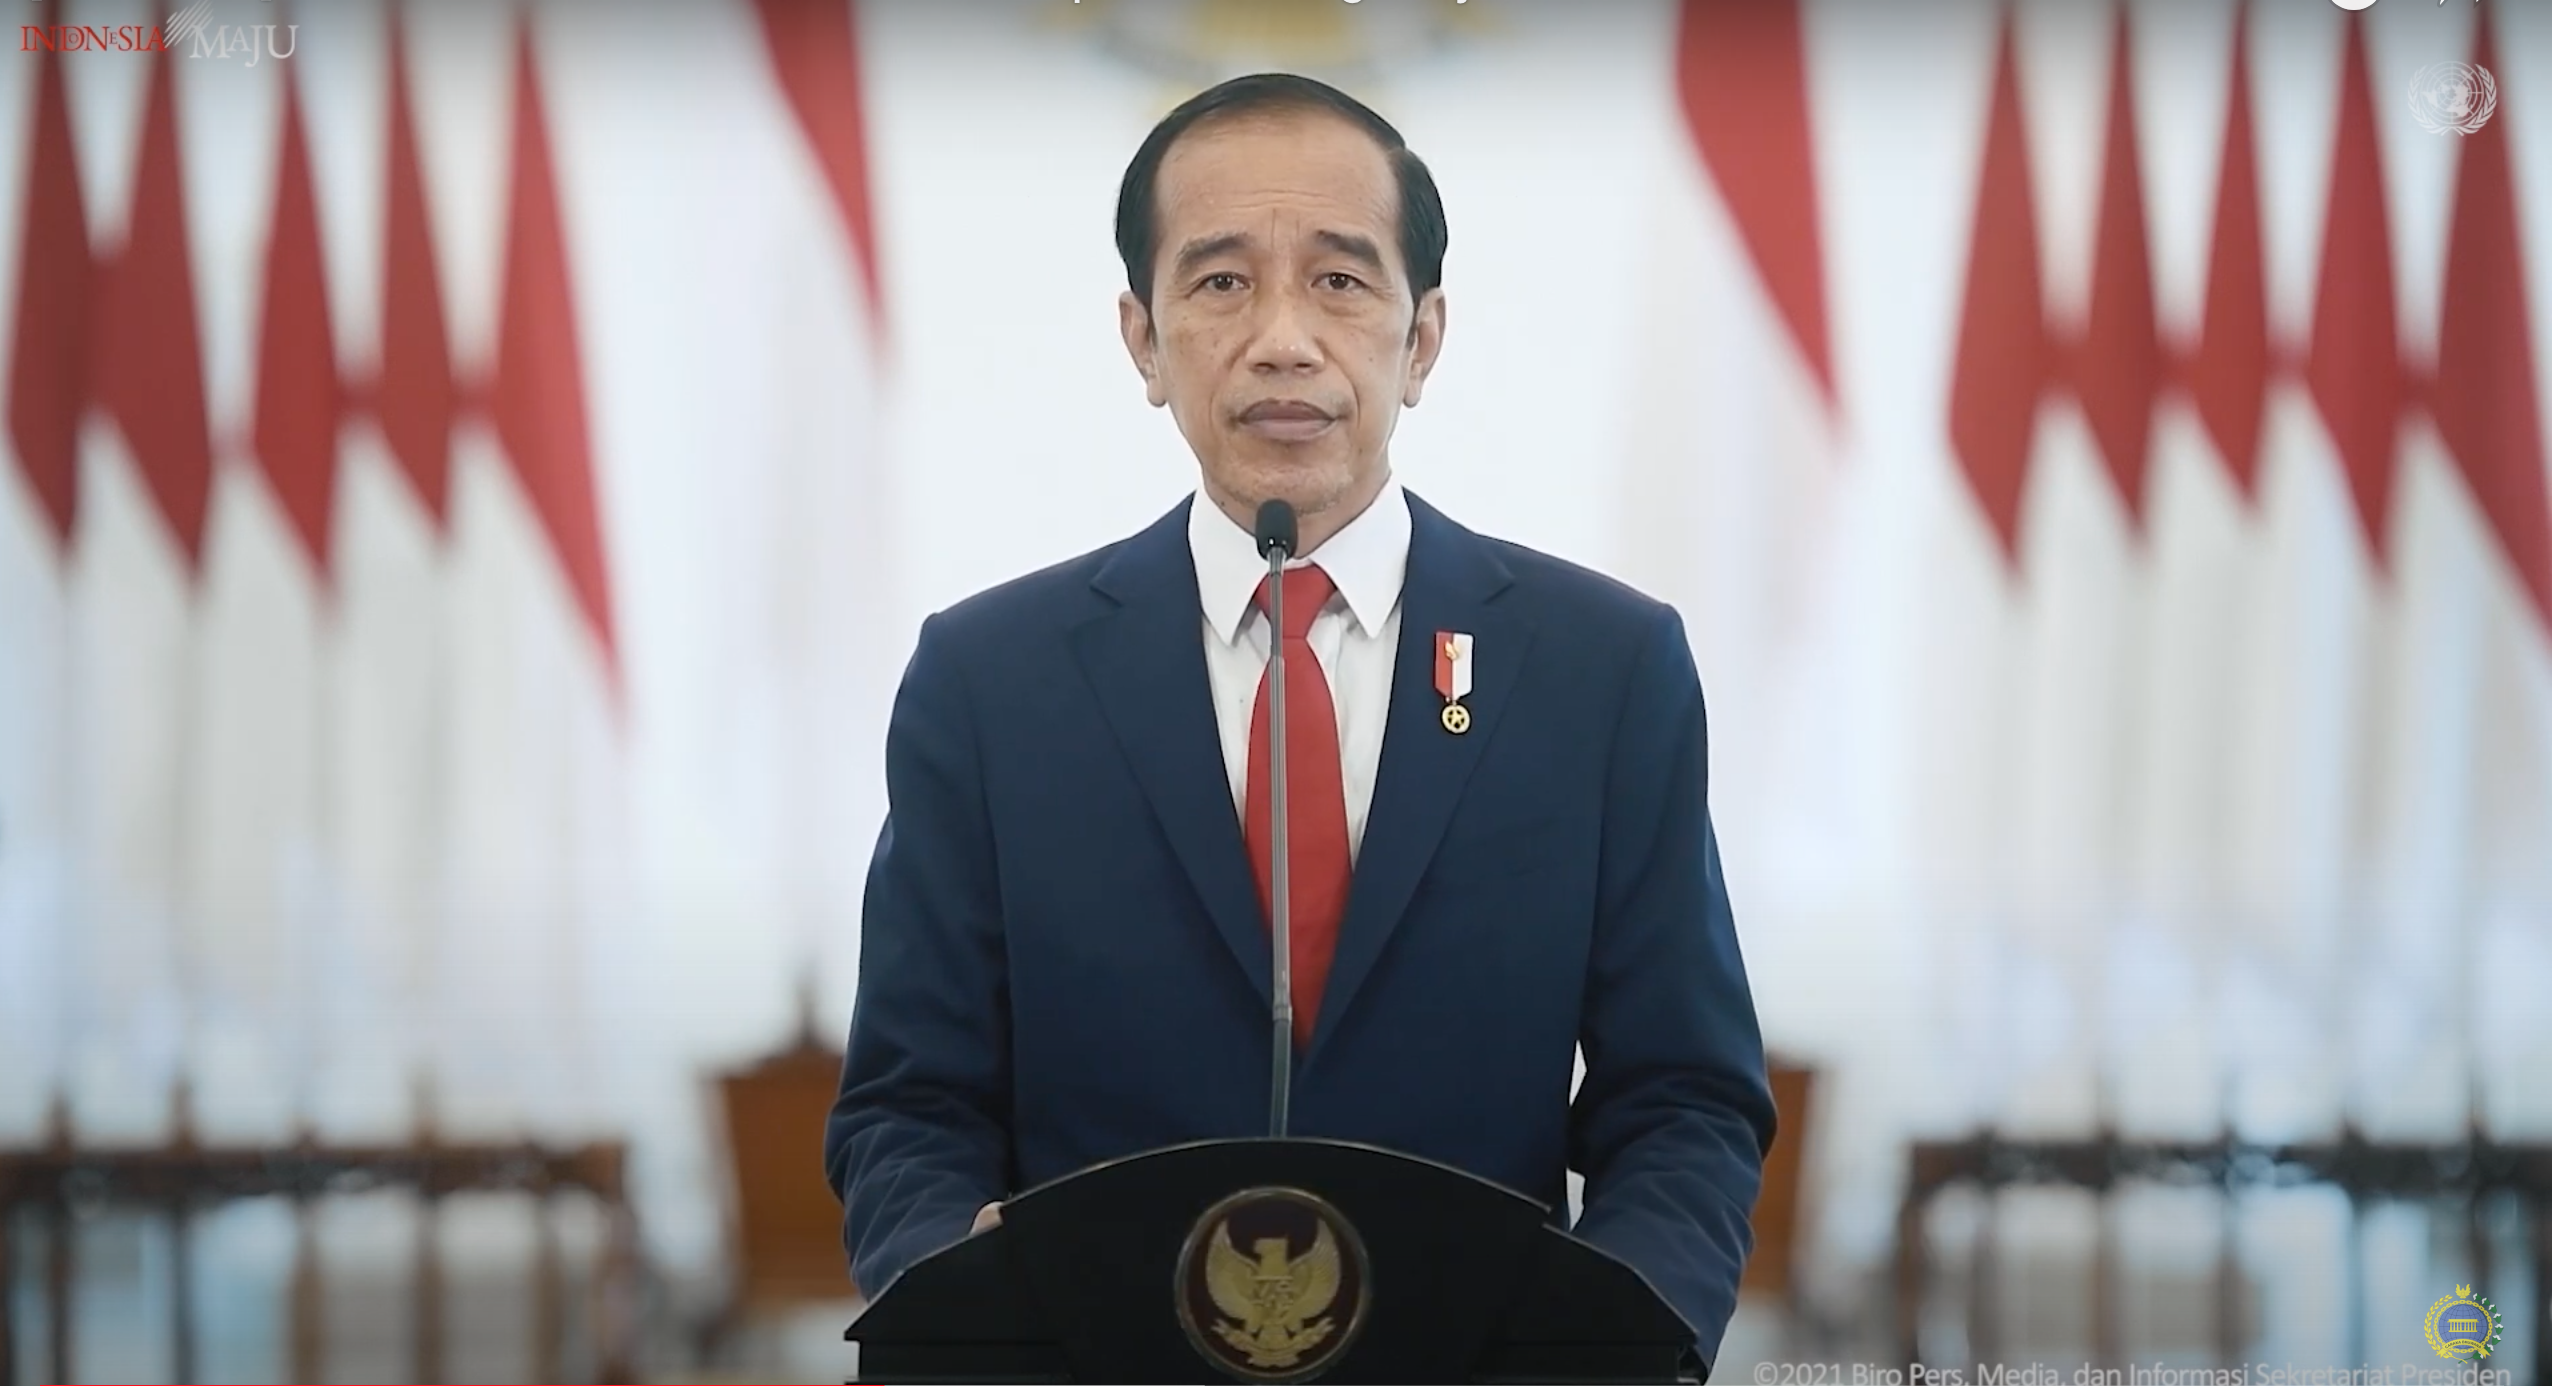 Indonesia calls on world to share burden of overcoming global challenges